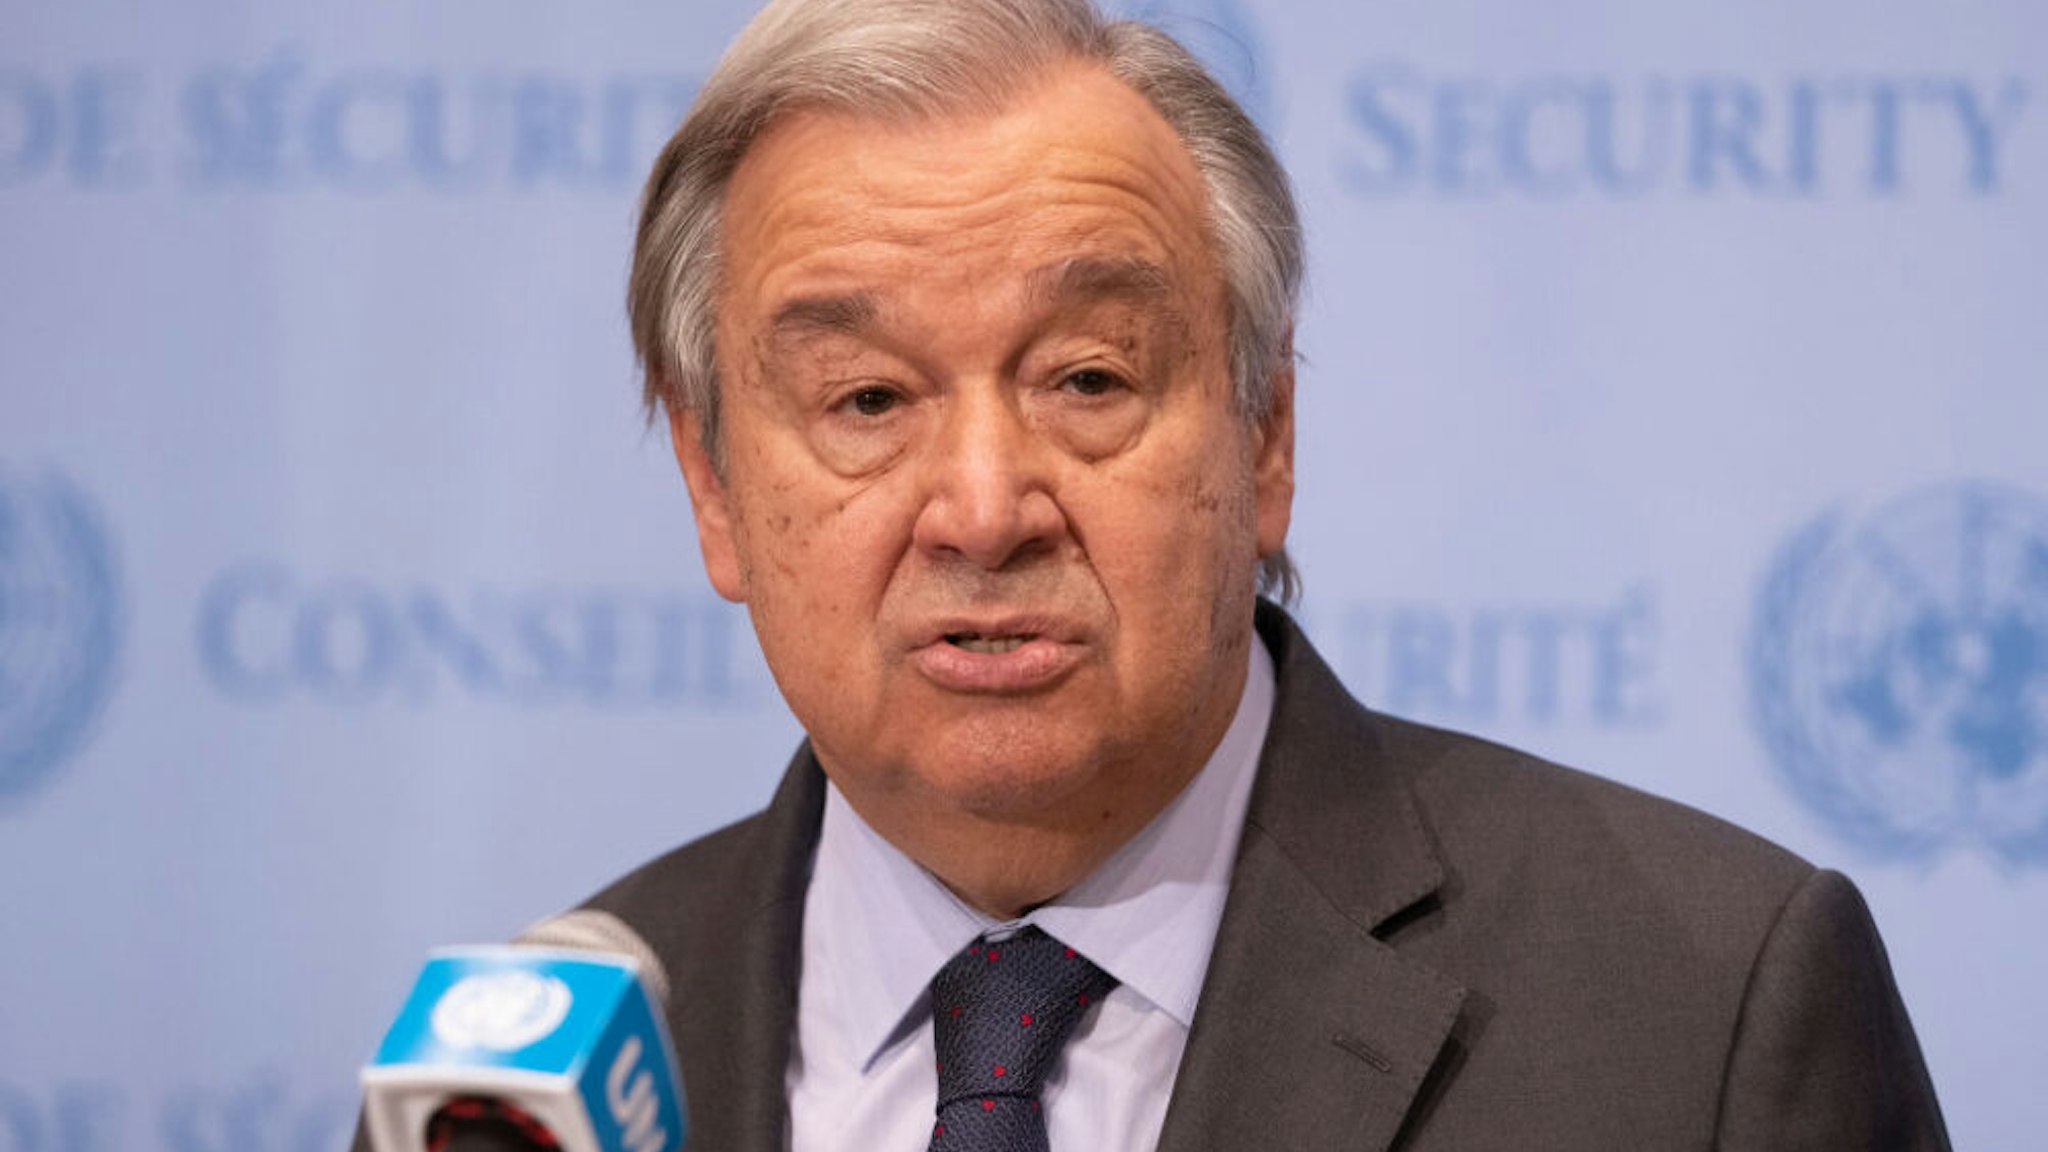 NEW YORK, UNITED STATES - 2022/02/22: UN the Secretary-General Antonio Guterres briefs reporters on the situation in Ukraine at UN Headquarters. Secretary-General stated that decision of the Russian Federation to recognize the so-called independence of certain areas of Donetsk and Luhansk regions is a violation of the territorial integrity and sovereignty of Ukraine. He added that our world is facing the biggest global peace and security crisis in recent year.